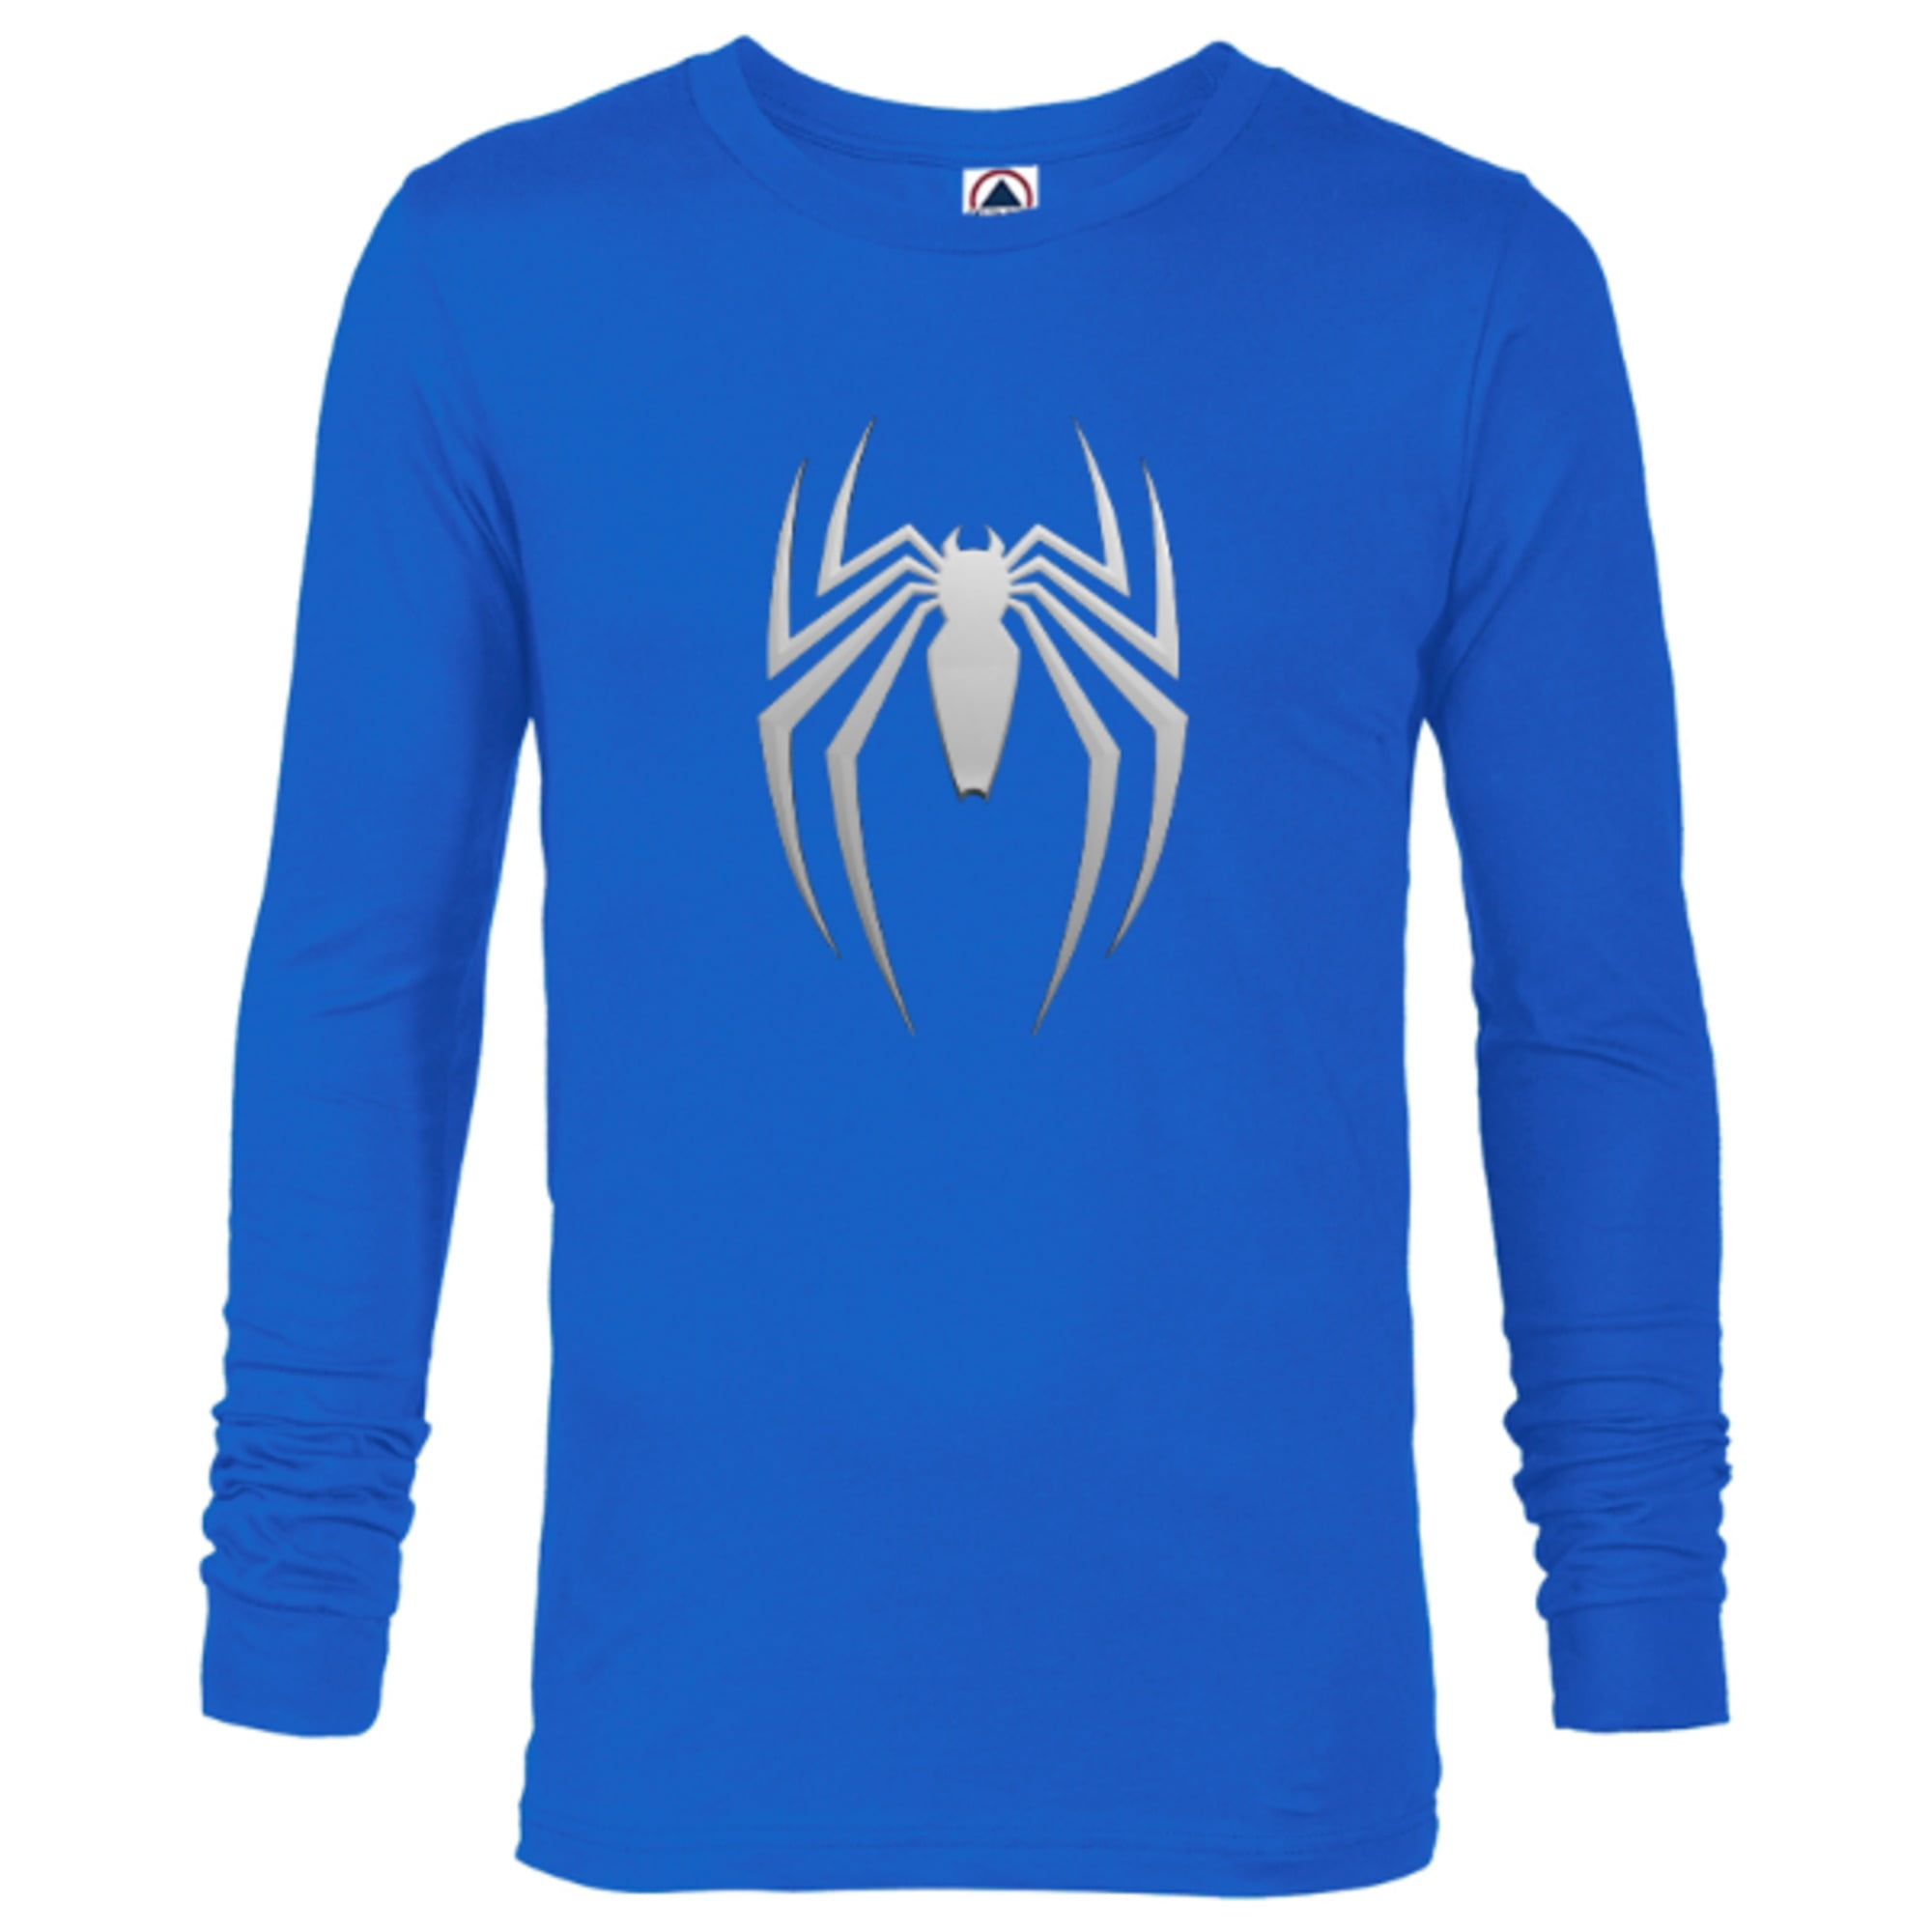  Marvel Spider-Man 2 Game Spider Logo Pullover Hoodie :  Clothing, Shoes & Jewelry